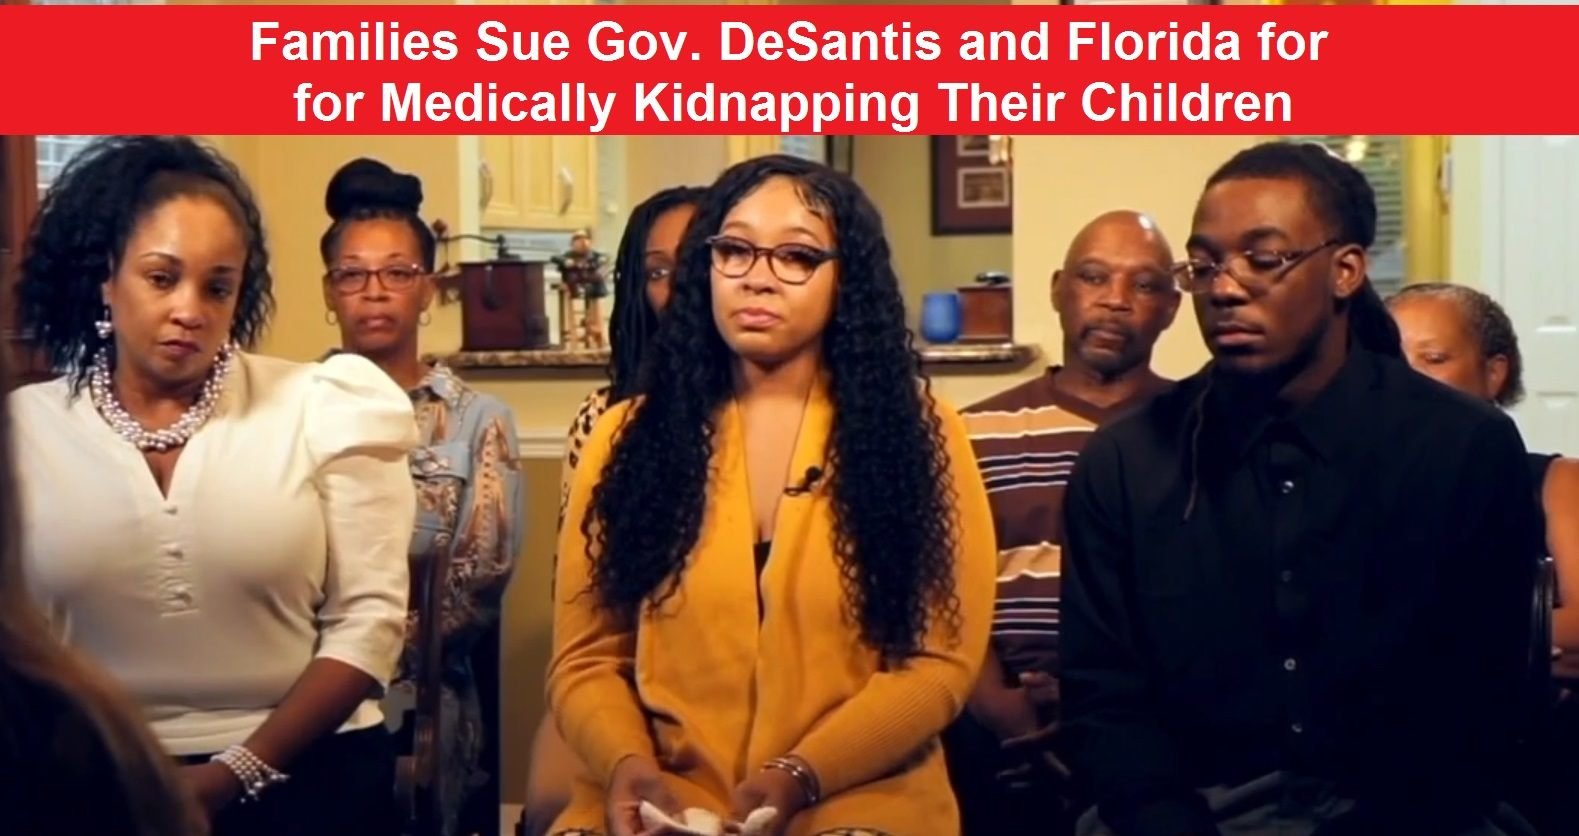 Families Sue Governor DeSantis and State of Florida for Medically Kidnapping Their Children